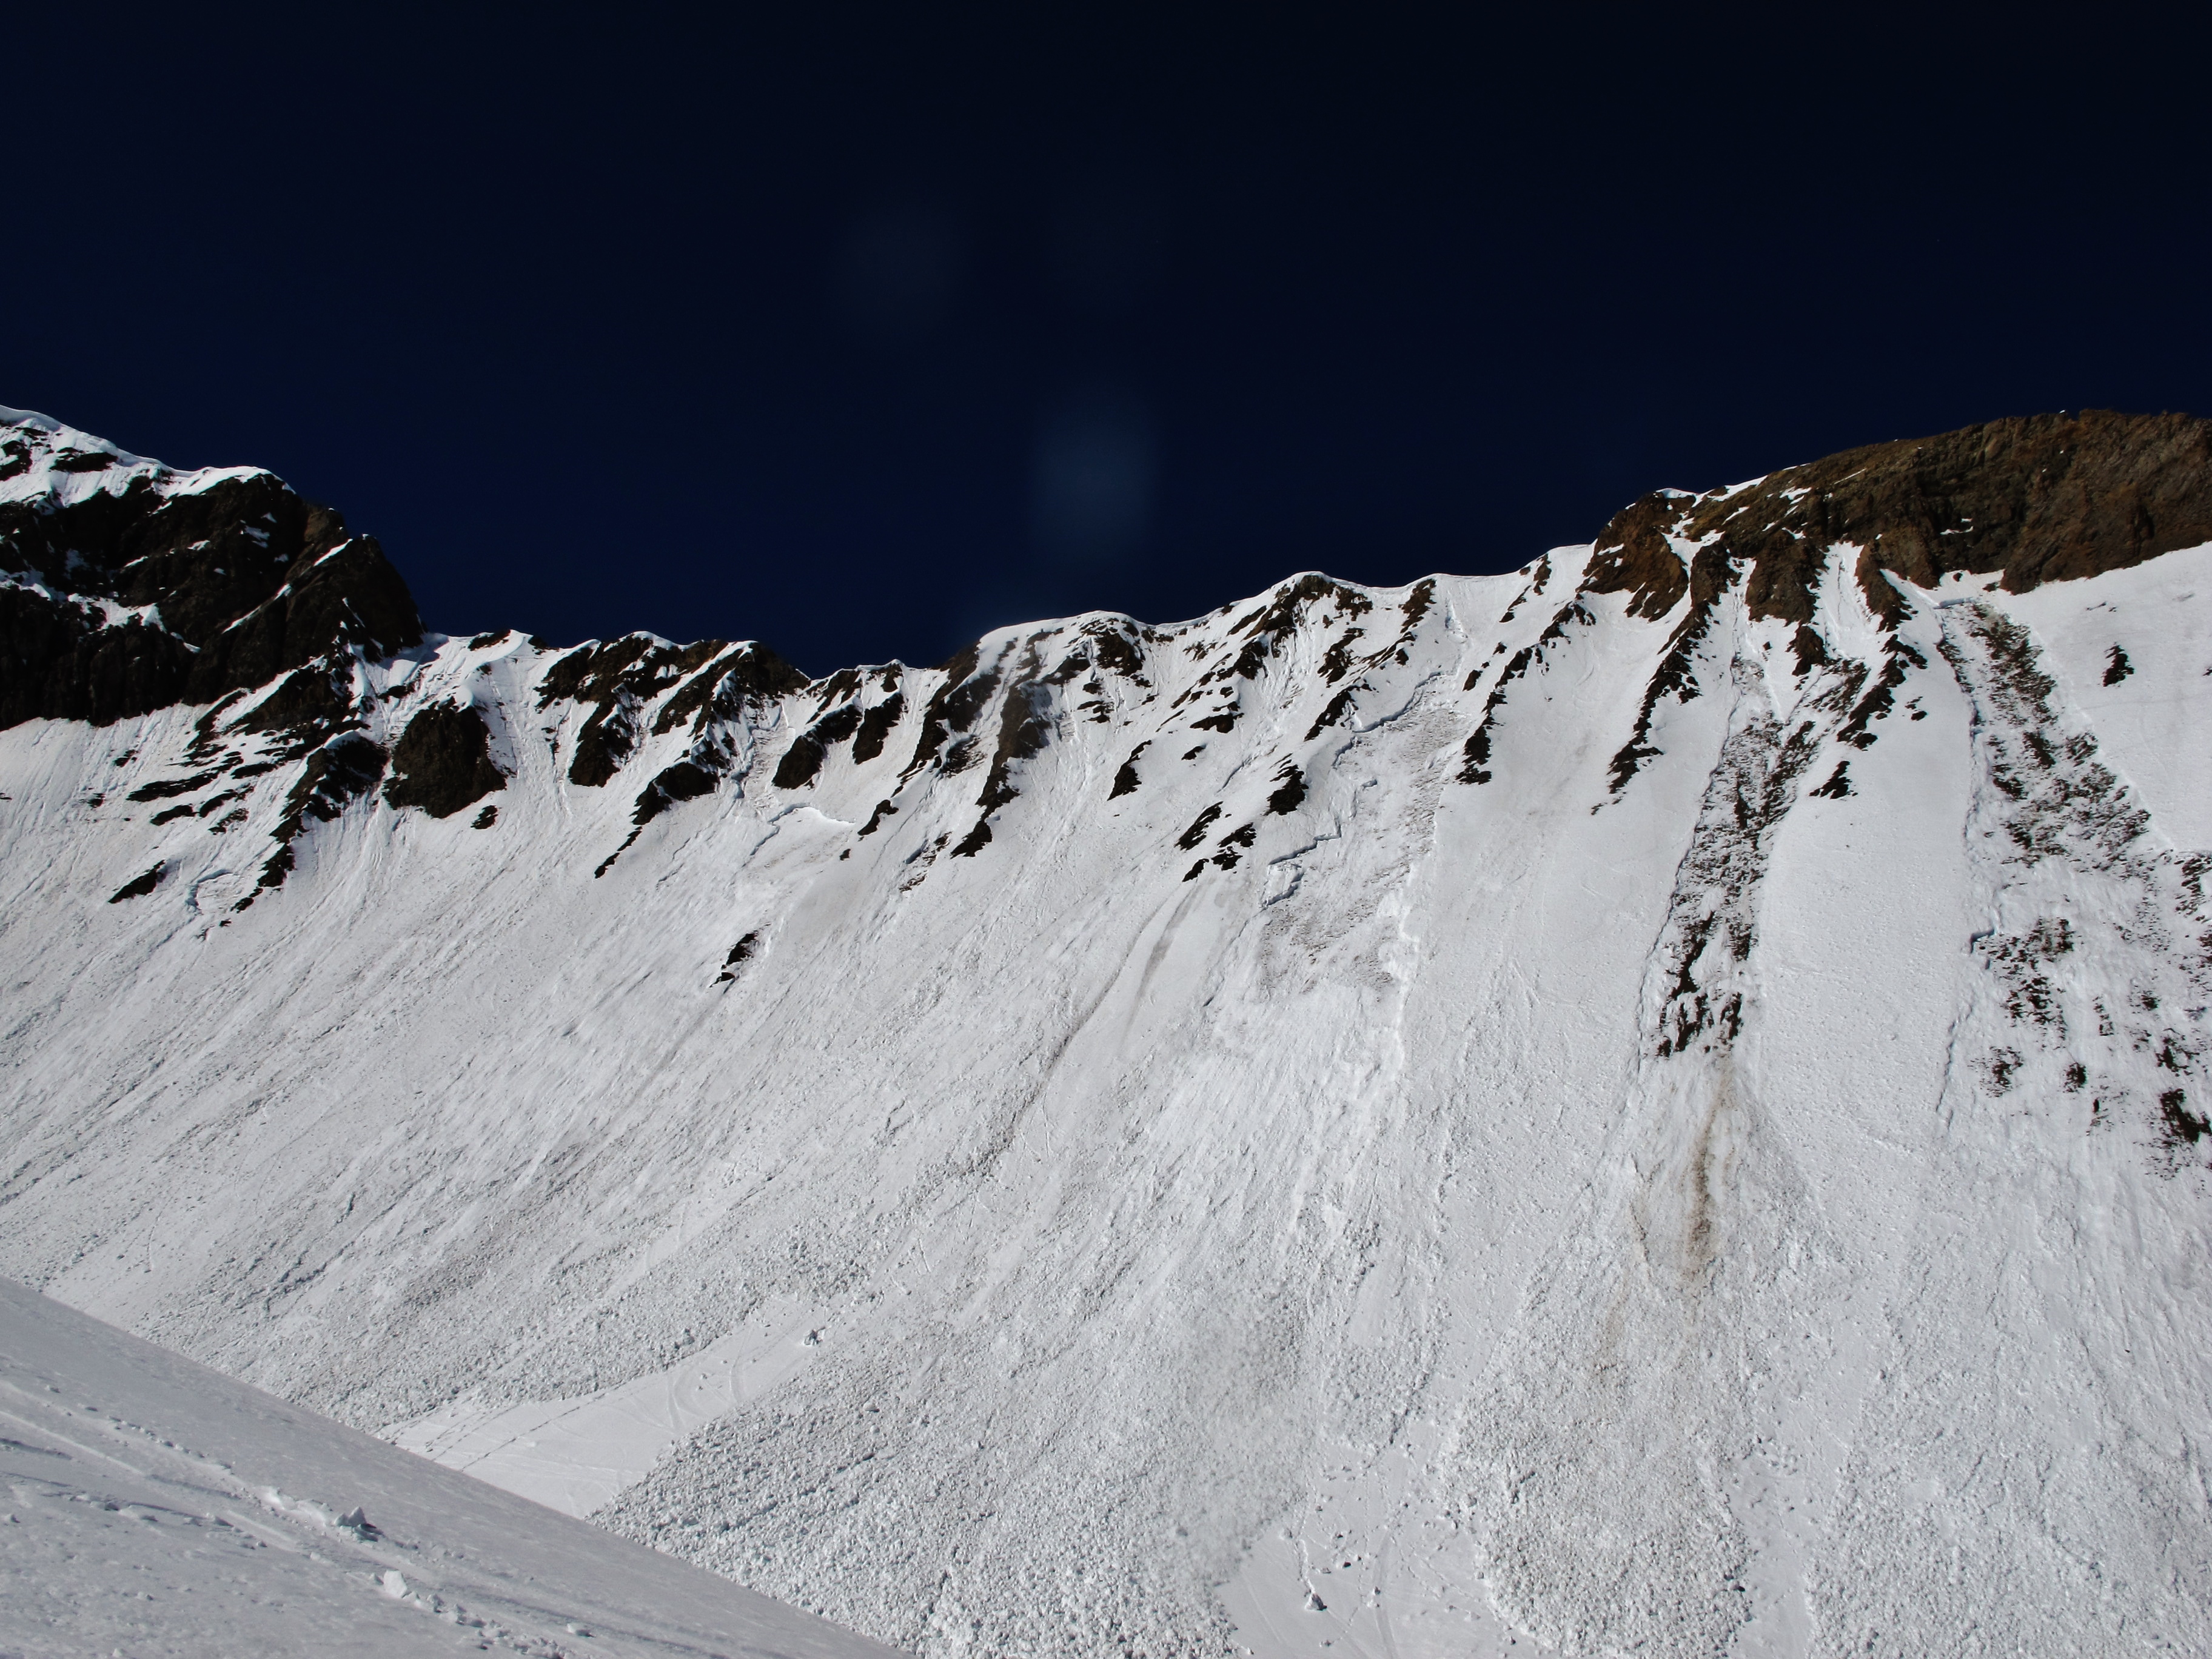 Wet avalanches at Big Sky